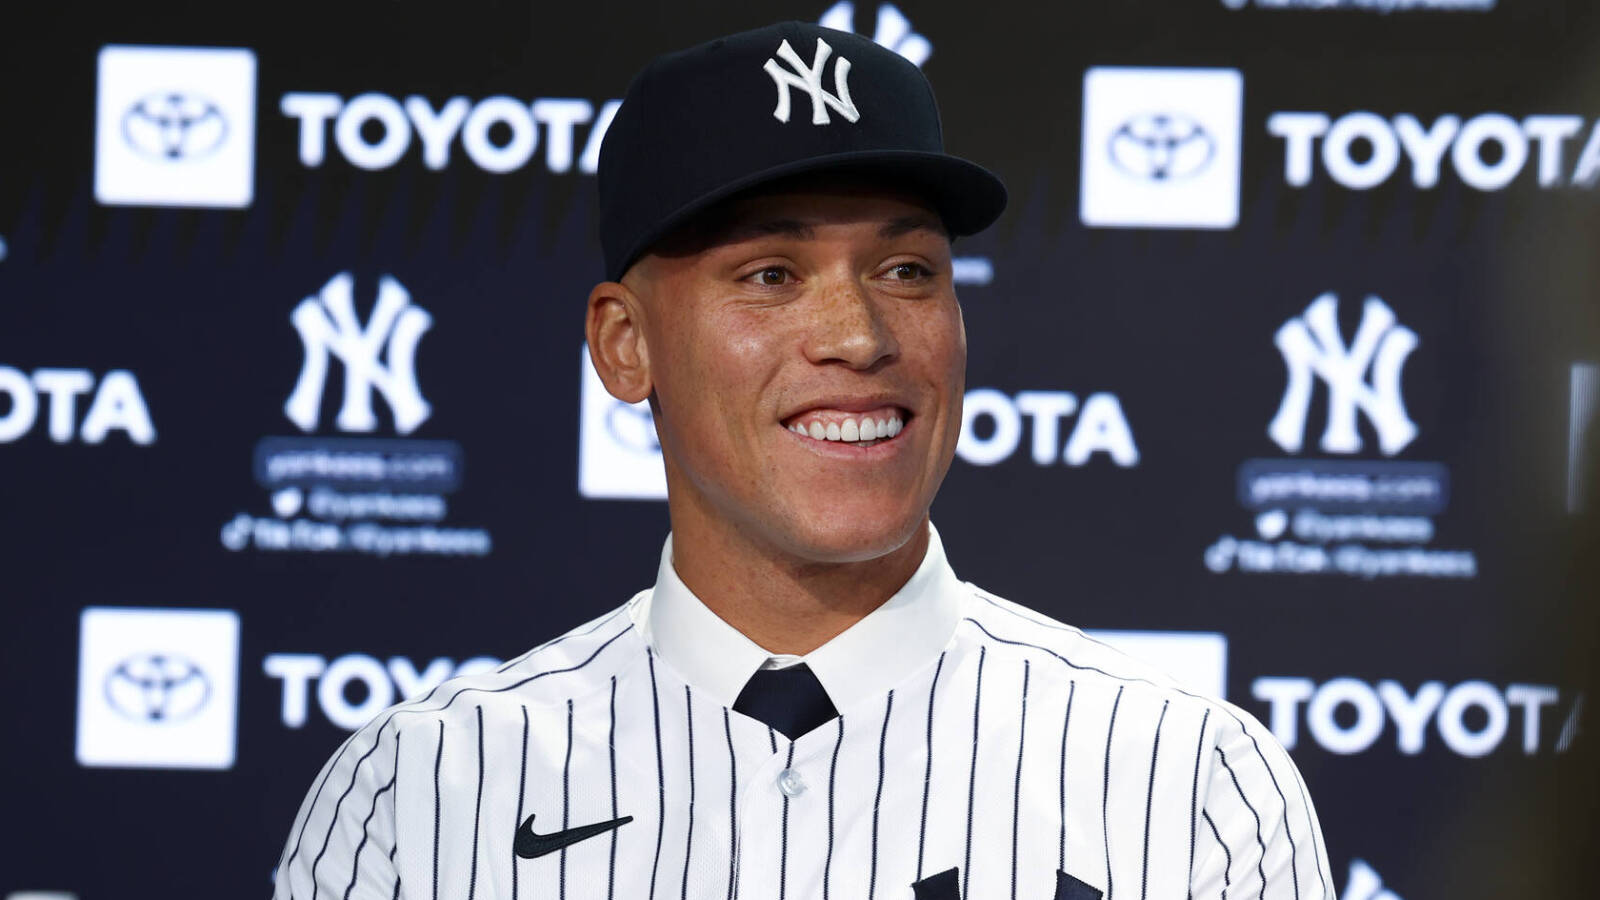 Video of Yankees' Aaron Judge taking reps at new position prompts speculation